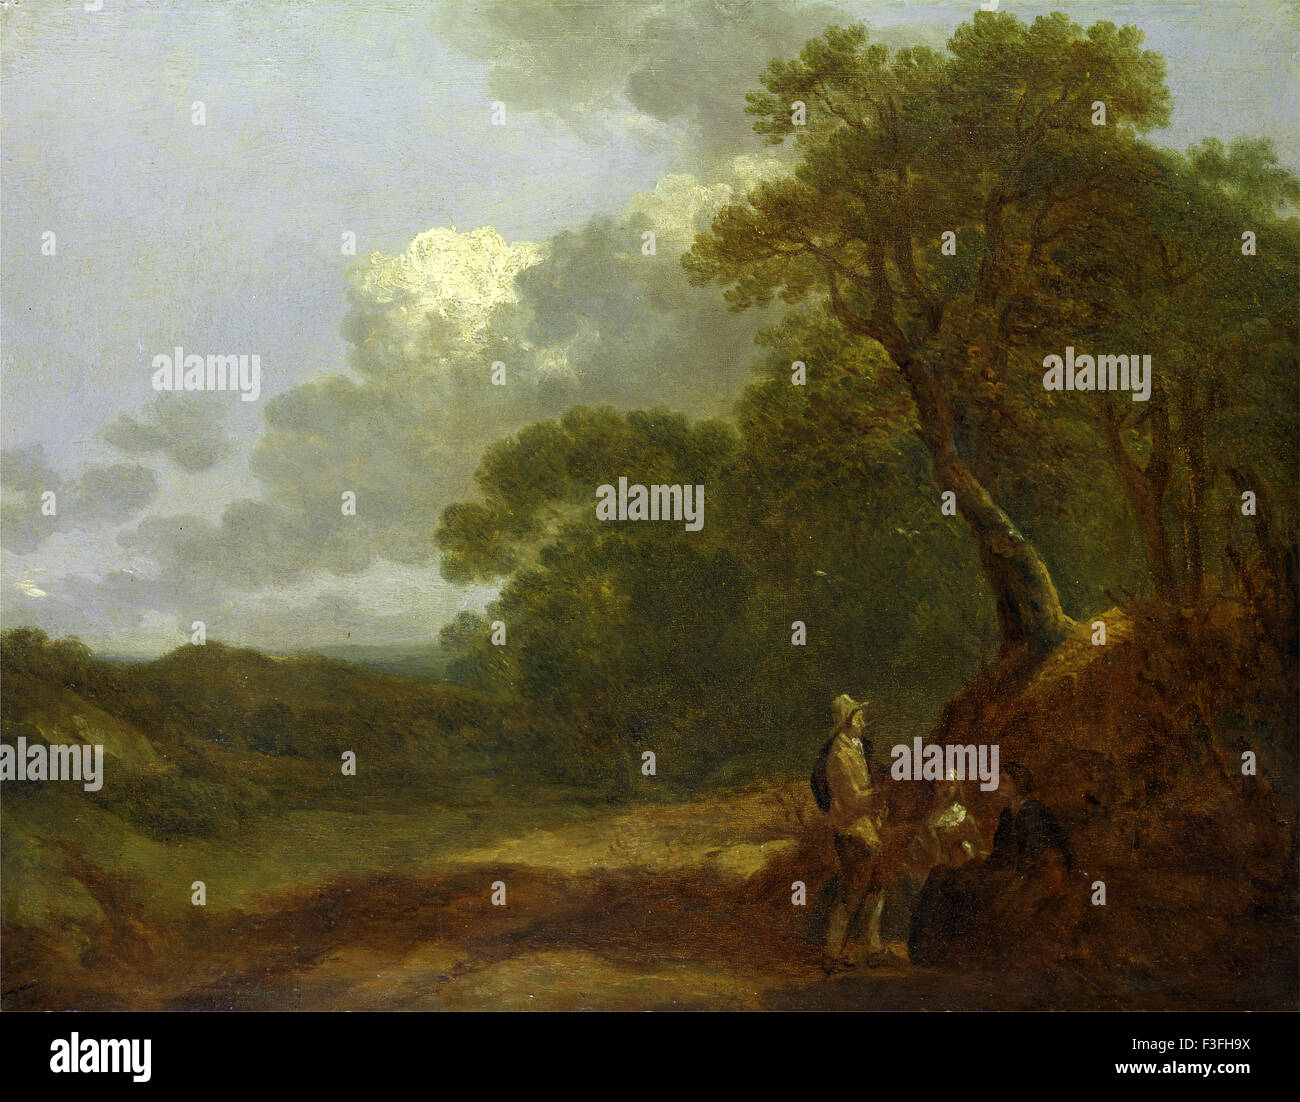 Thomas Gainsboroug - Wooded Landscape with a Man Talking to Two Seated Women Stock Photo